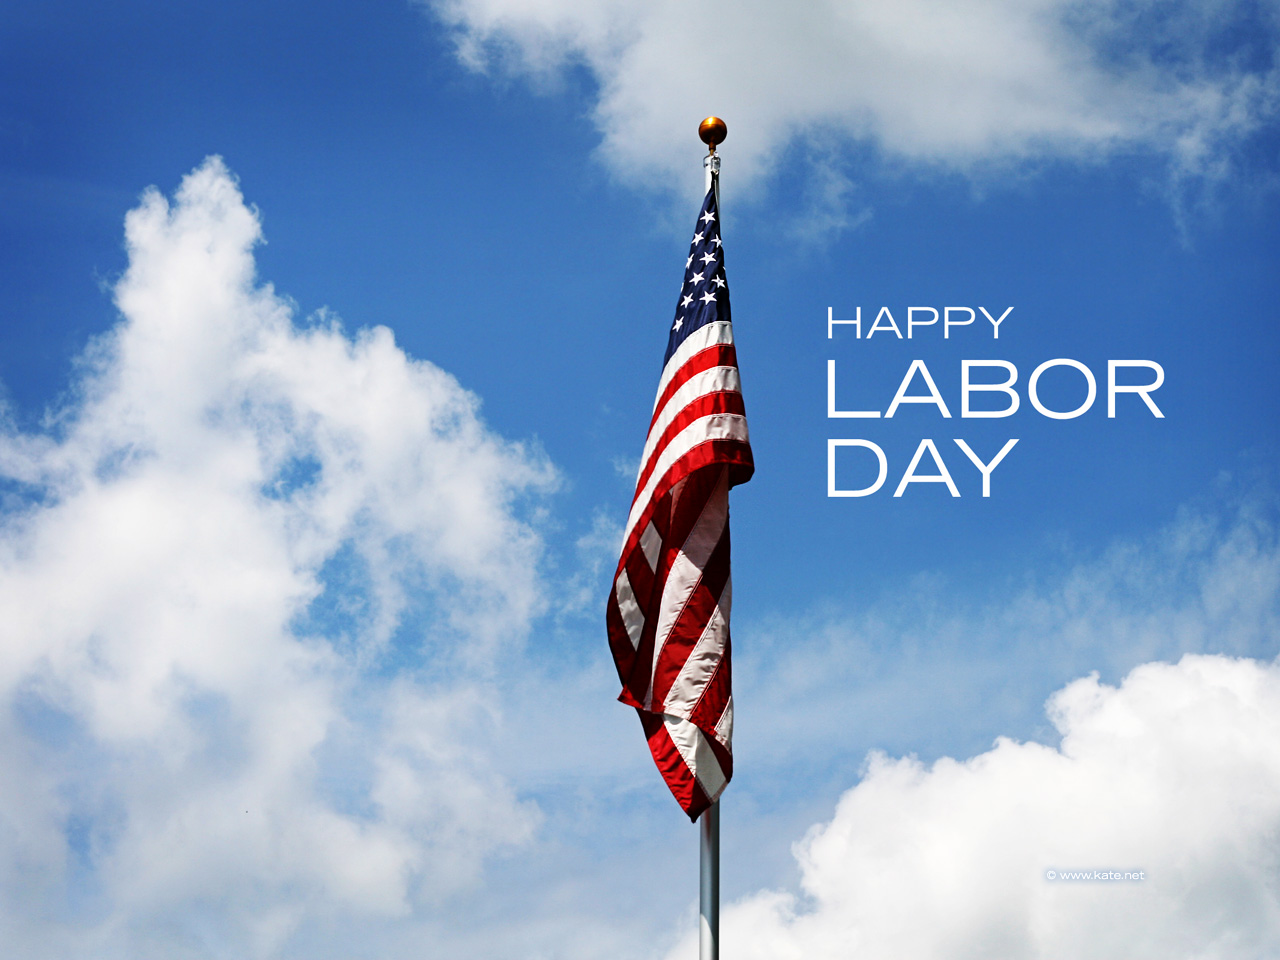 Labor Day Wallpaper Resources From Kate